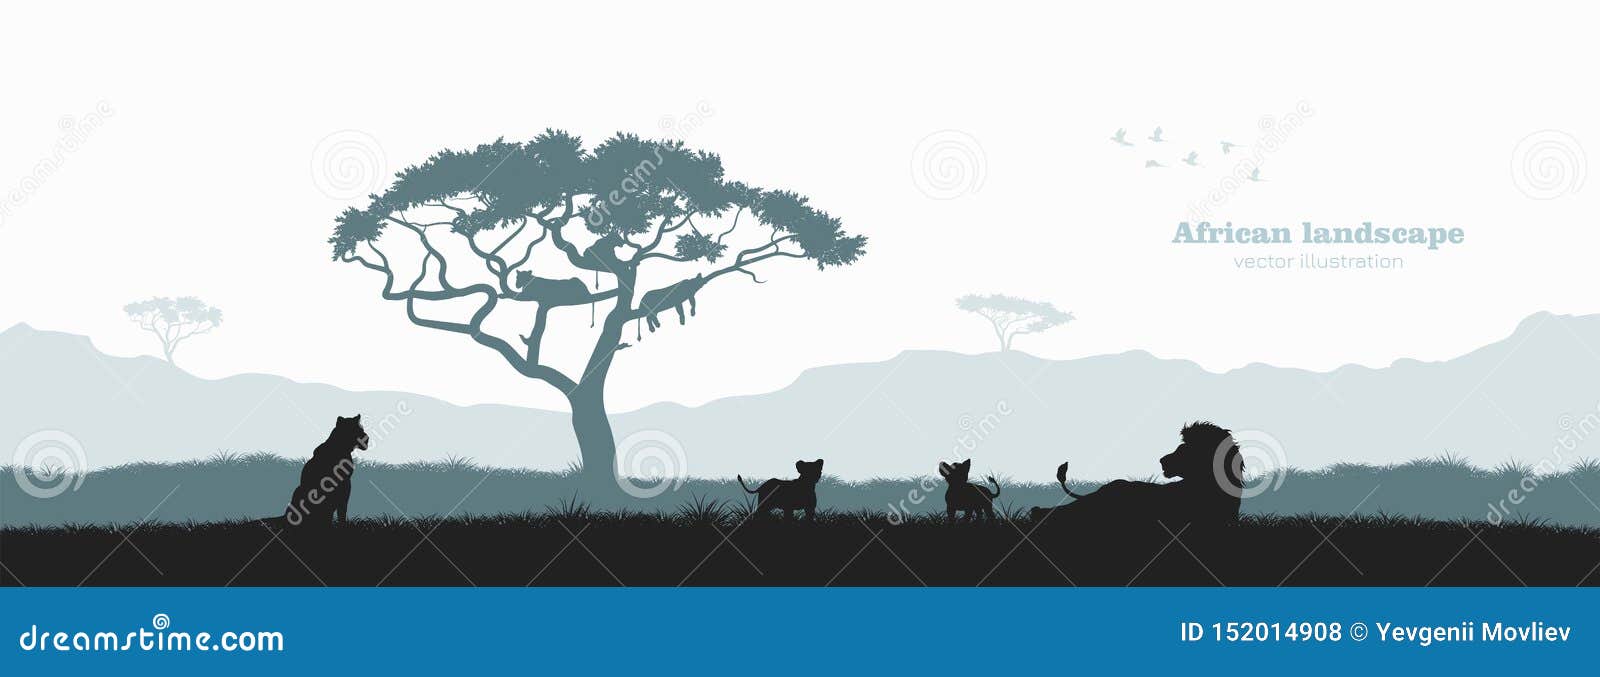 black silhouette of lion pride. landscape with wild african animals. scene of savannah wildlife. travel poster of africa